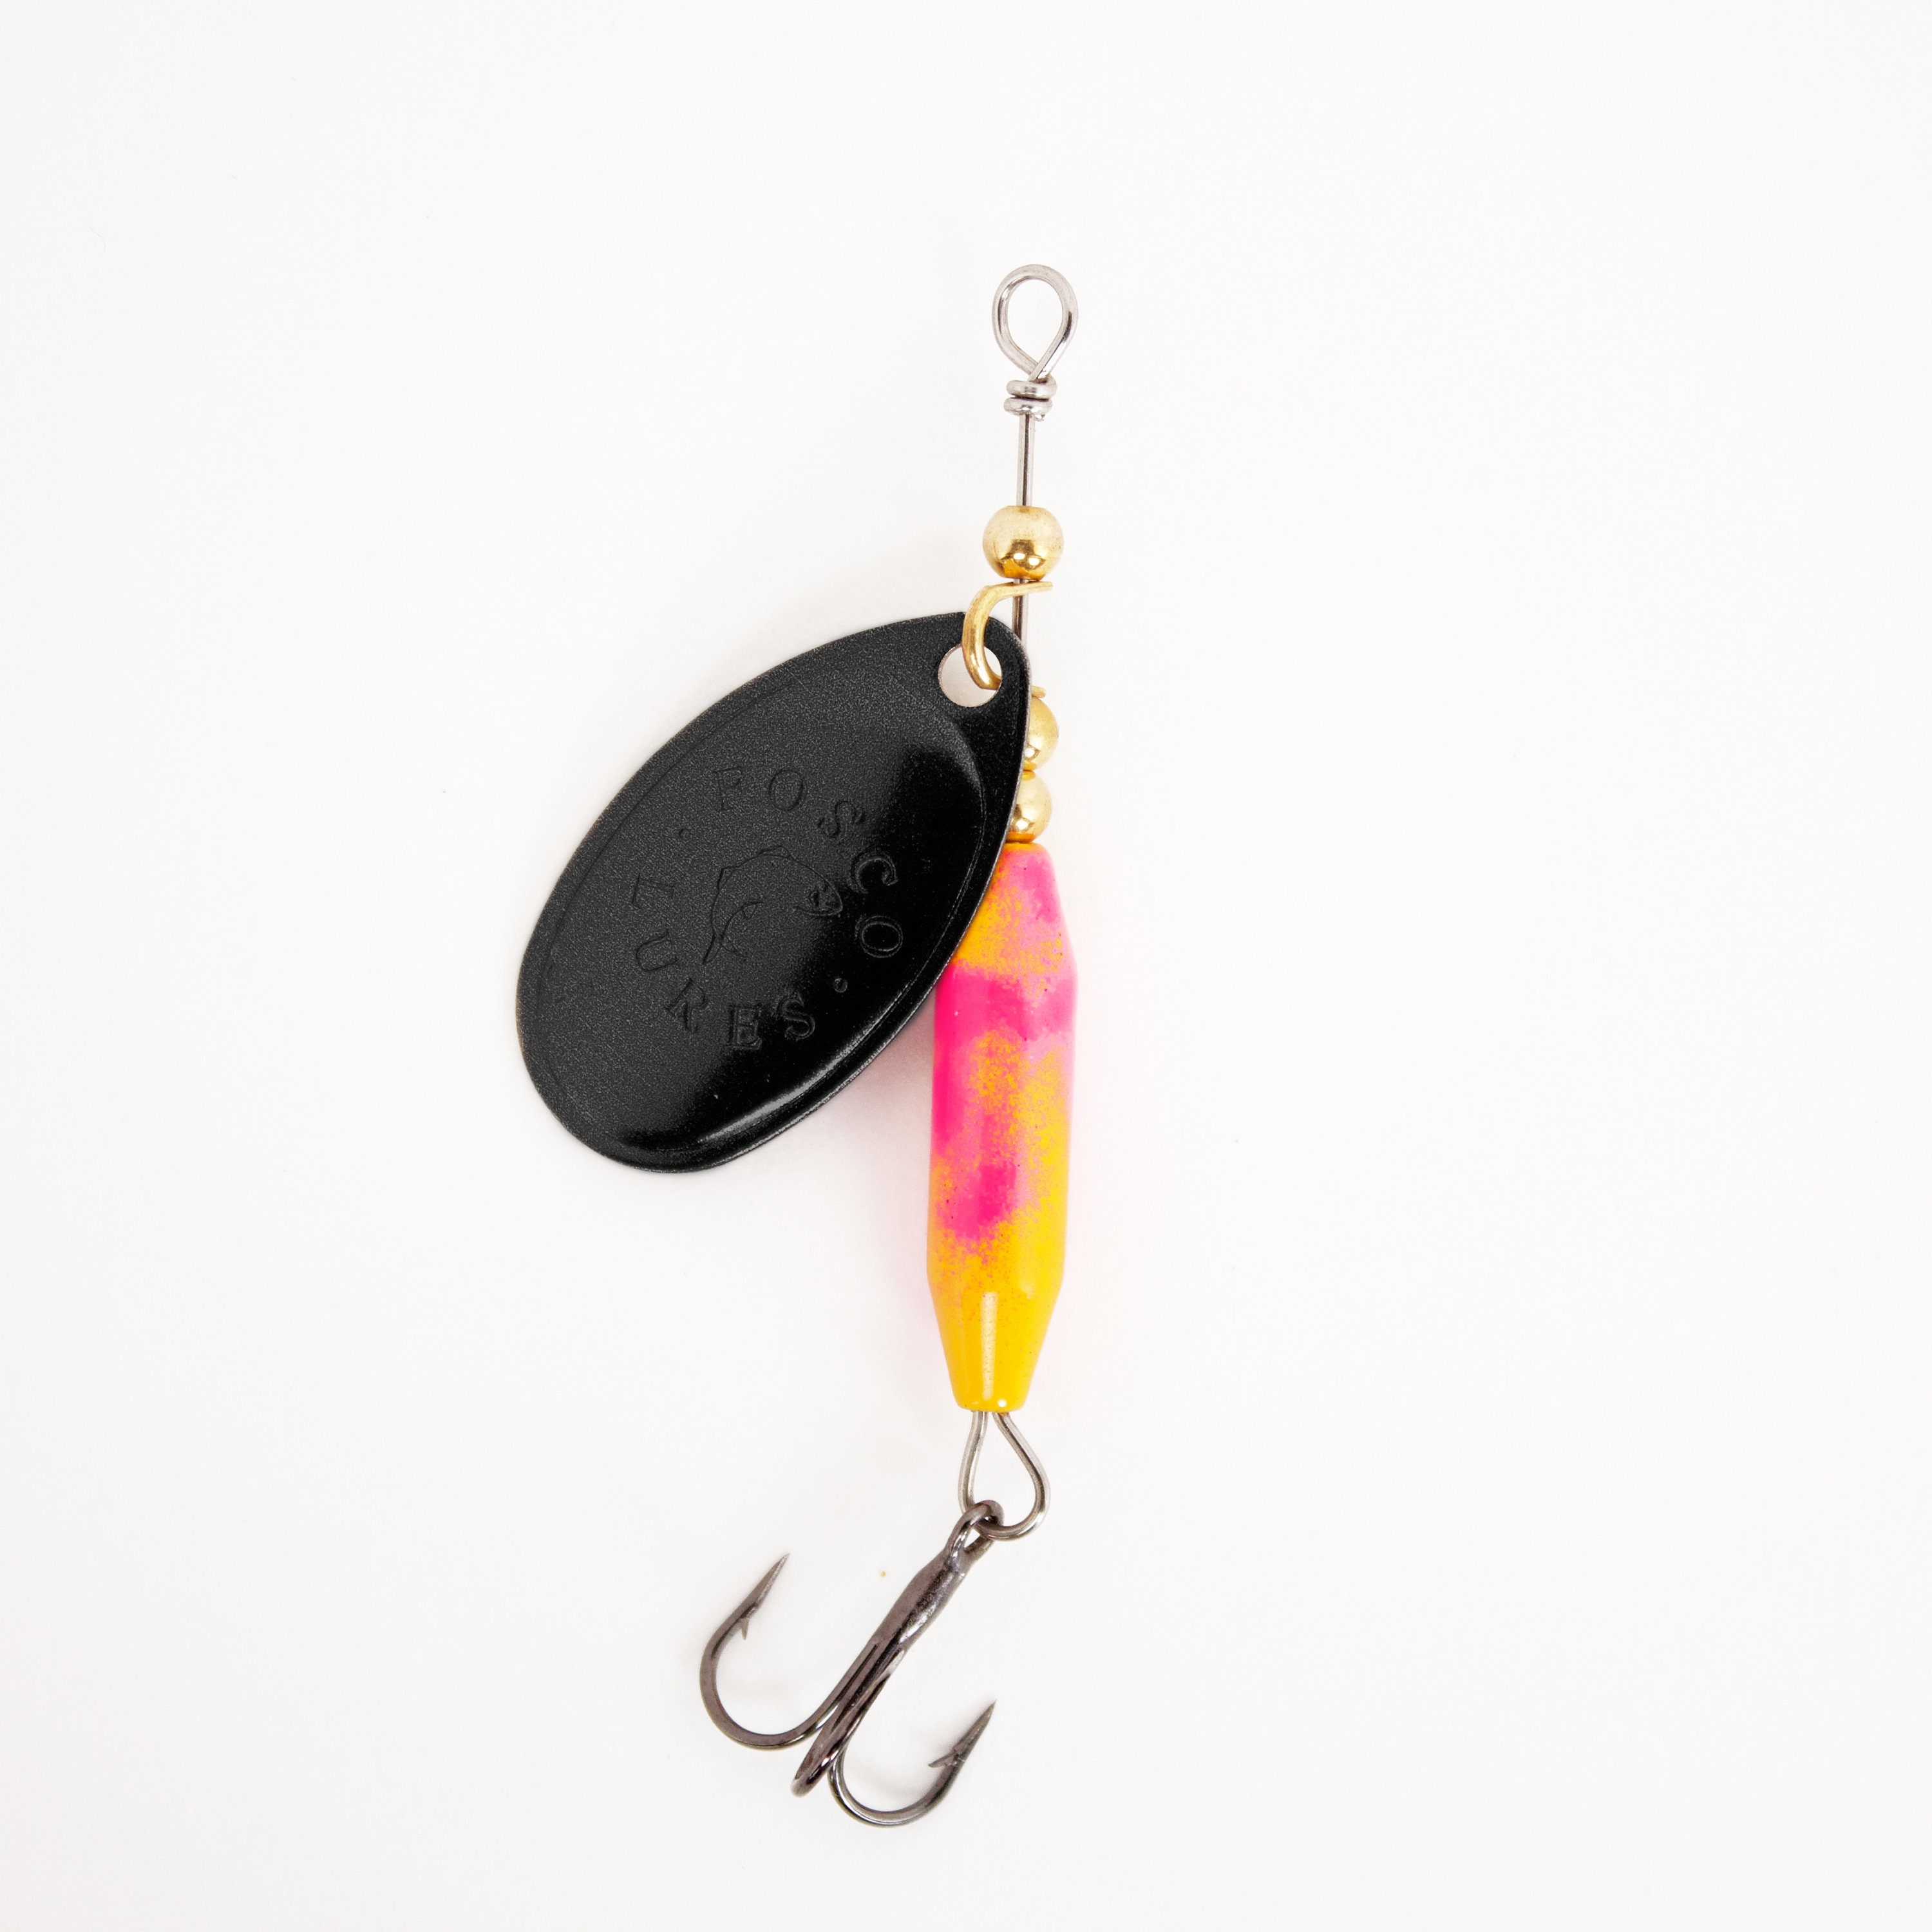 Handmade Spinner Fishing Lure Yellow & Pink W/ Black Blade Inline Spinner  Made in Canada Trout Salmon Bass Pike Perch Panfish Gift -  Canada